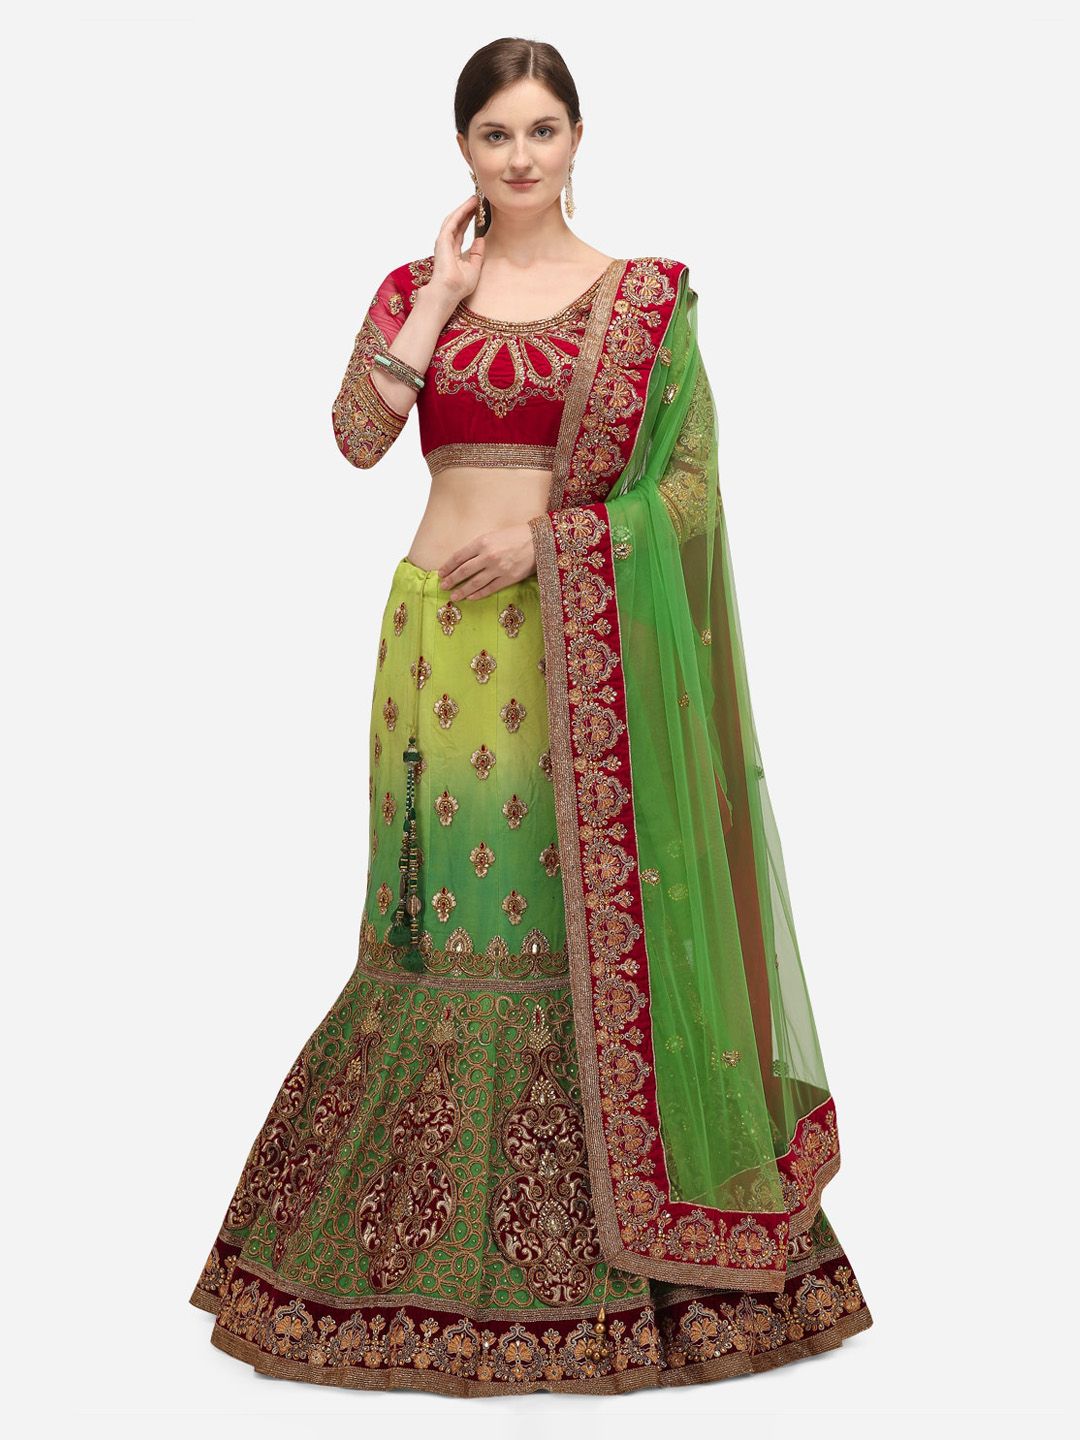 NAKKASHI Green & Red Embroidered Semi-Stitched Lehenga & Unstitched Blouse with Dupatta Price in India